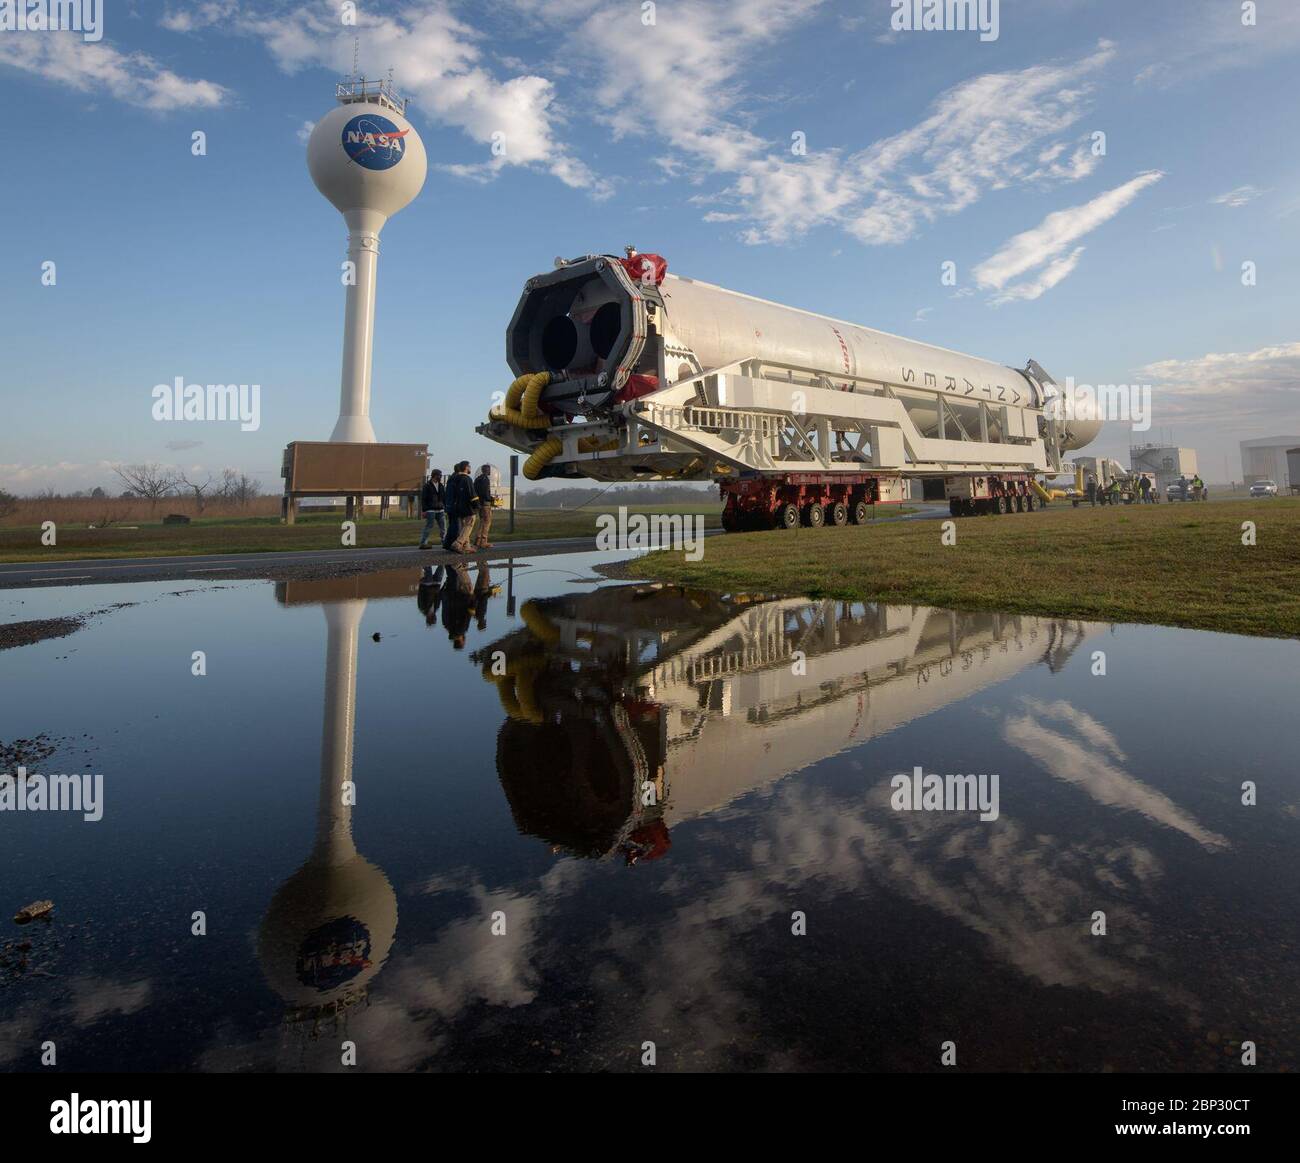 Northrop Grumman Antares CRS-11 Rollout  A Northrop Grumman Antares rocket is seen as it rolls out to Pad-0A, Monday, April 15, 2019 at NASA's Wallops Flight Facility in Virginia. Northrop Grumman’s 11th contracted cargo resupply mission with NASA to the International Space Station will deliver about 7,600 pounds of science and research, crew supplies and vehicle hardware to the orbital laboratory and its crew. Stock Photo